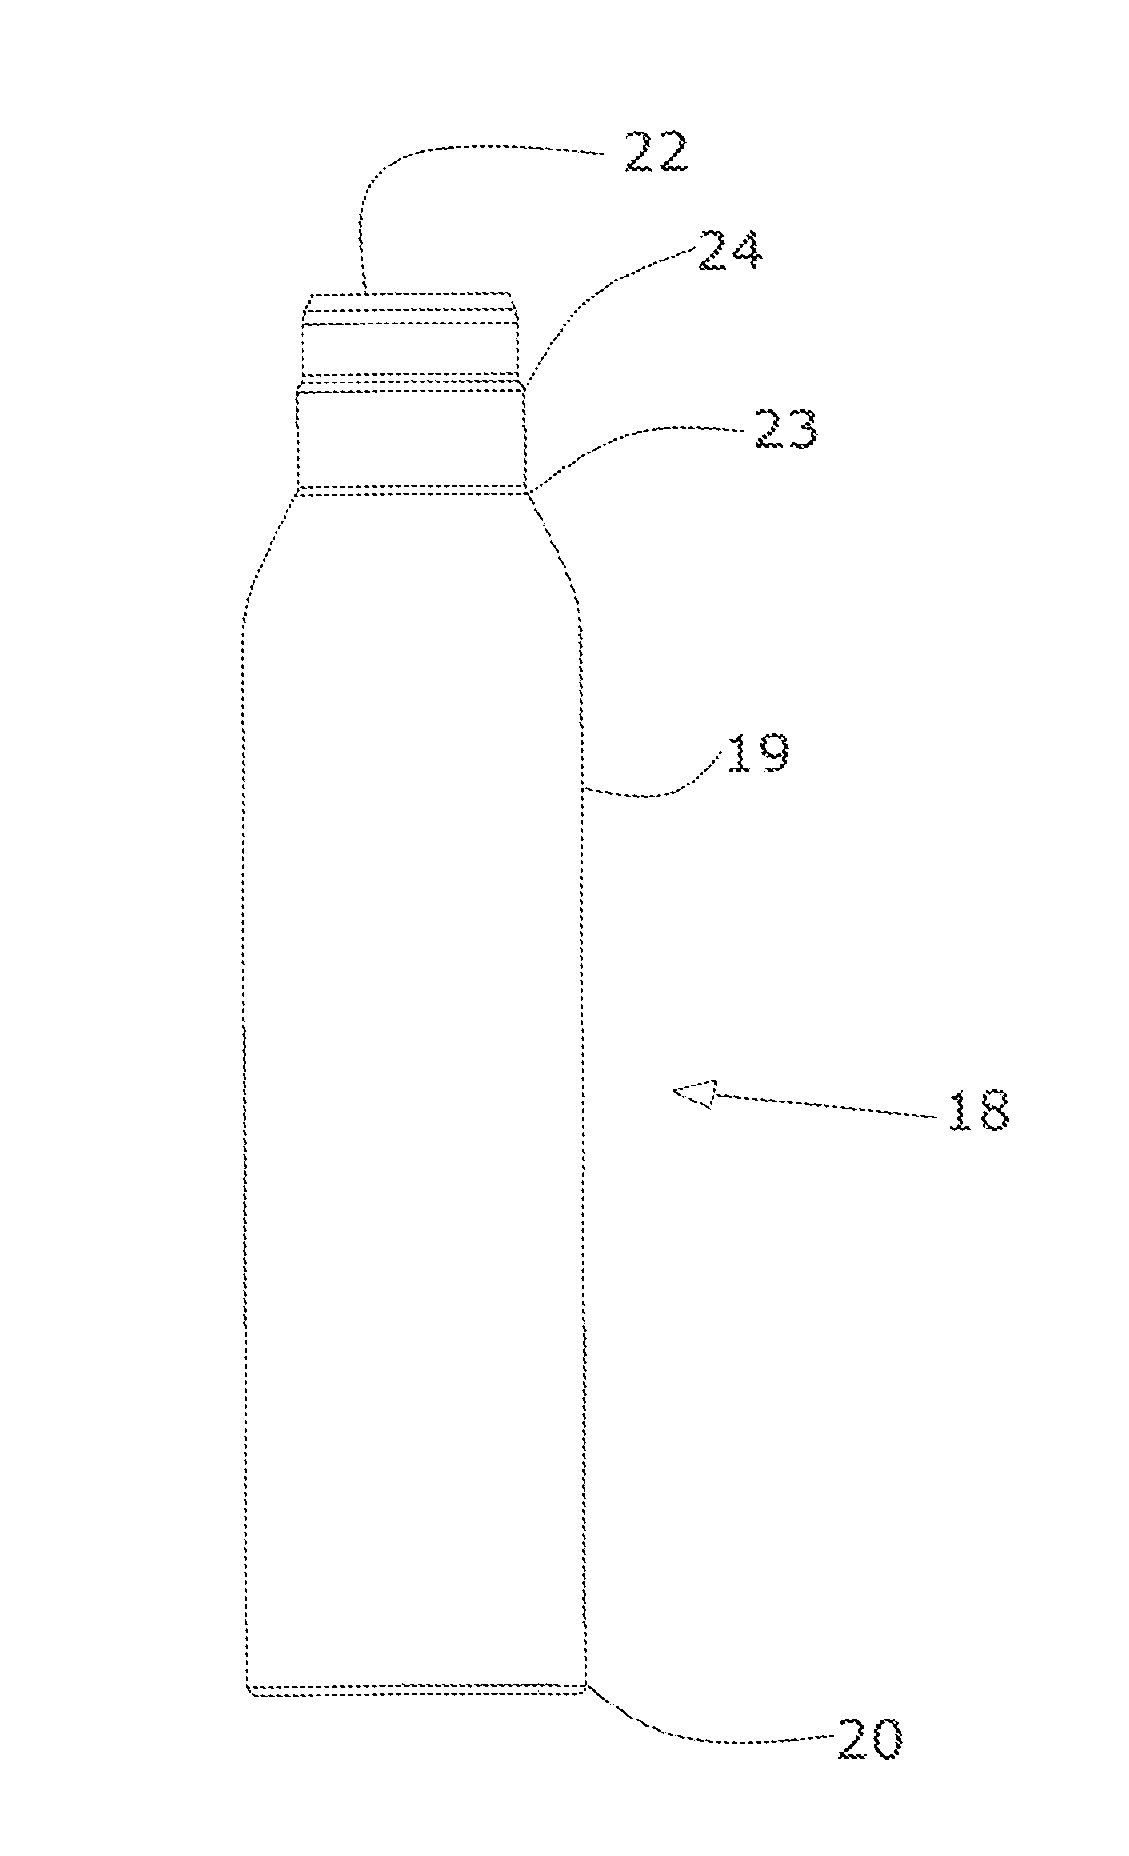 Method for blow molding metal containers